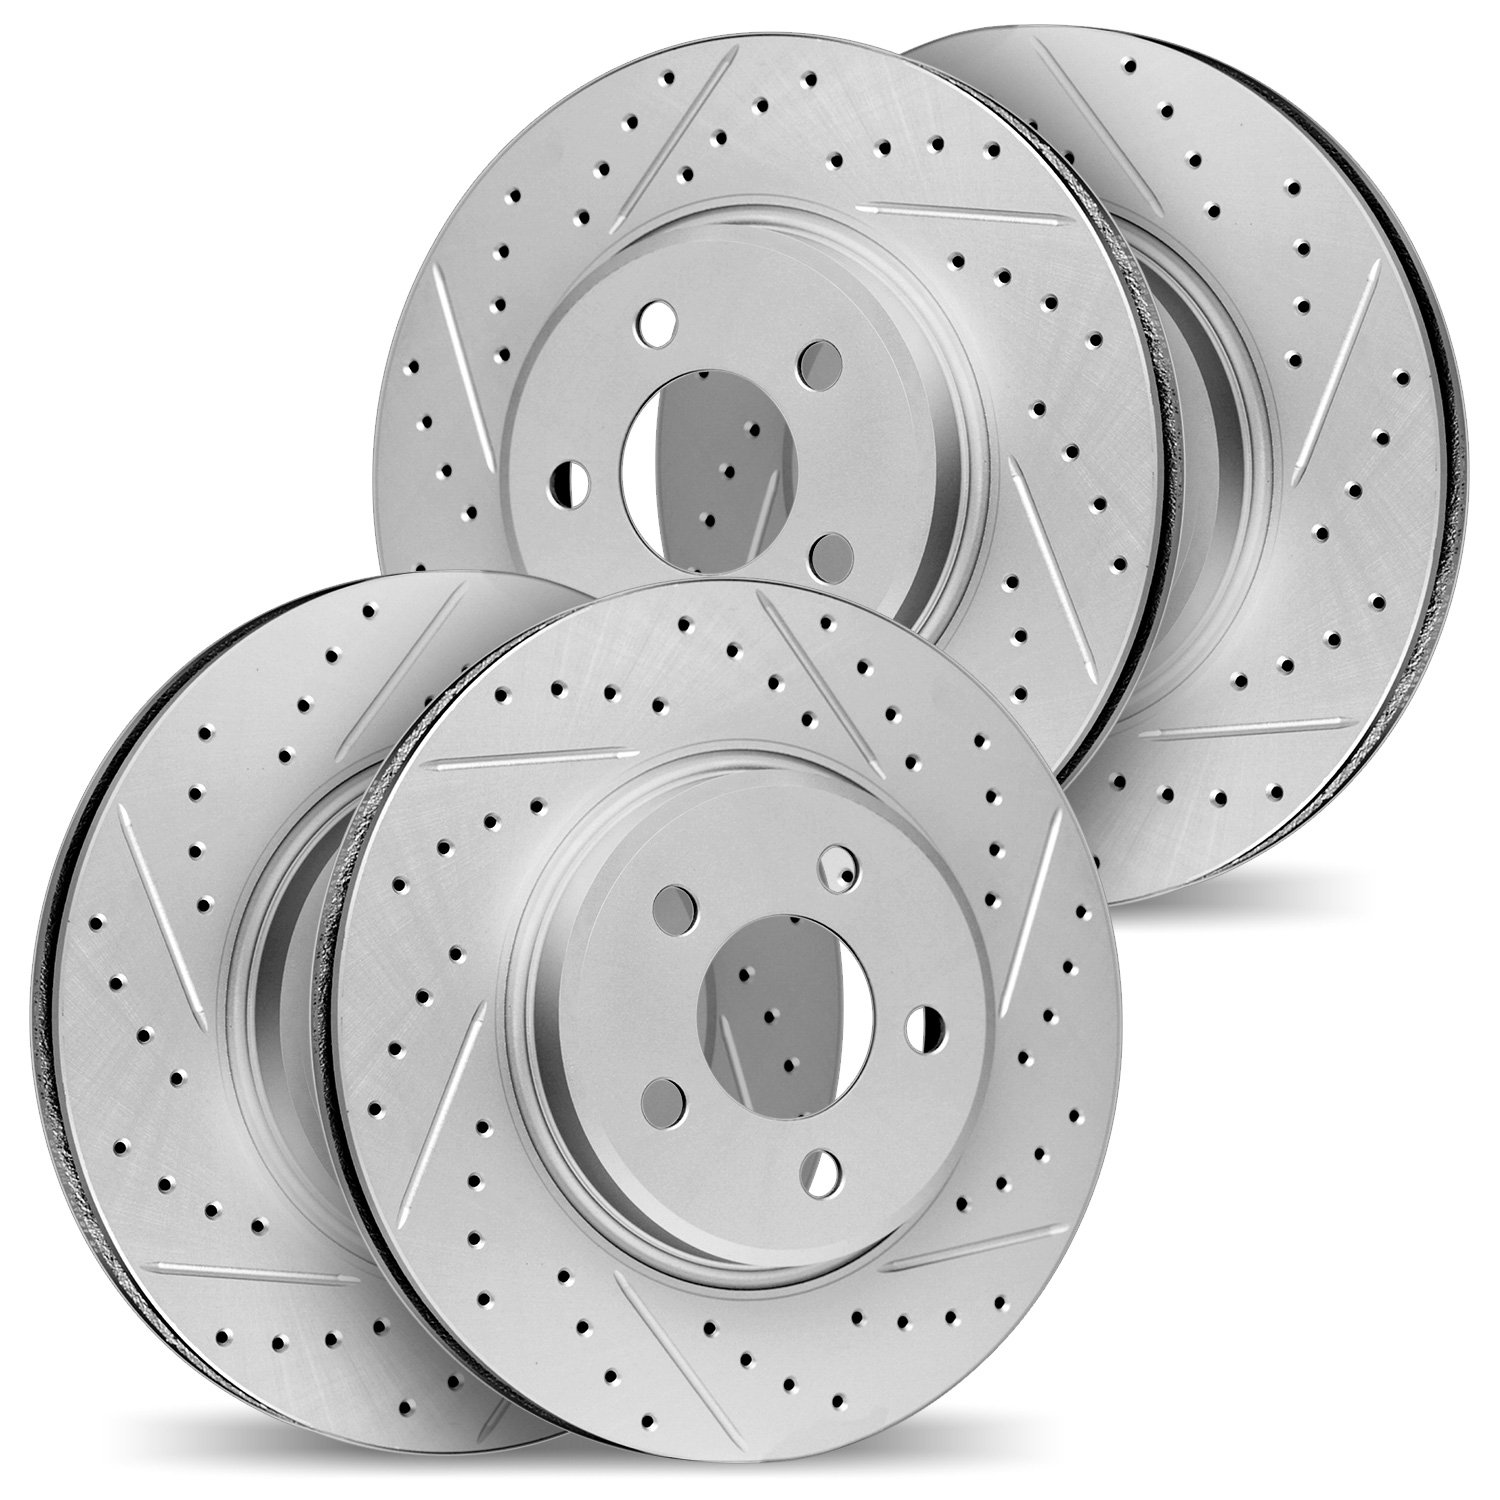 2004-67002 Geoperformance Drilled/Slotted Brake Rotors, 2003-2019 Infiniti/Nissan, Position: Front and Rear